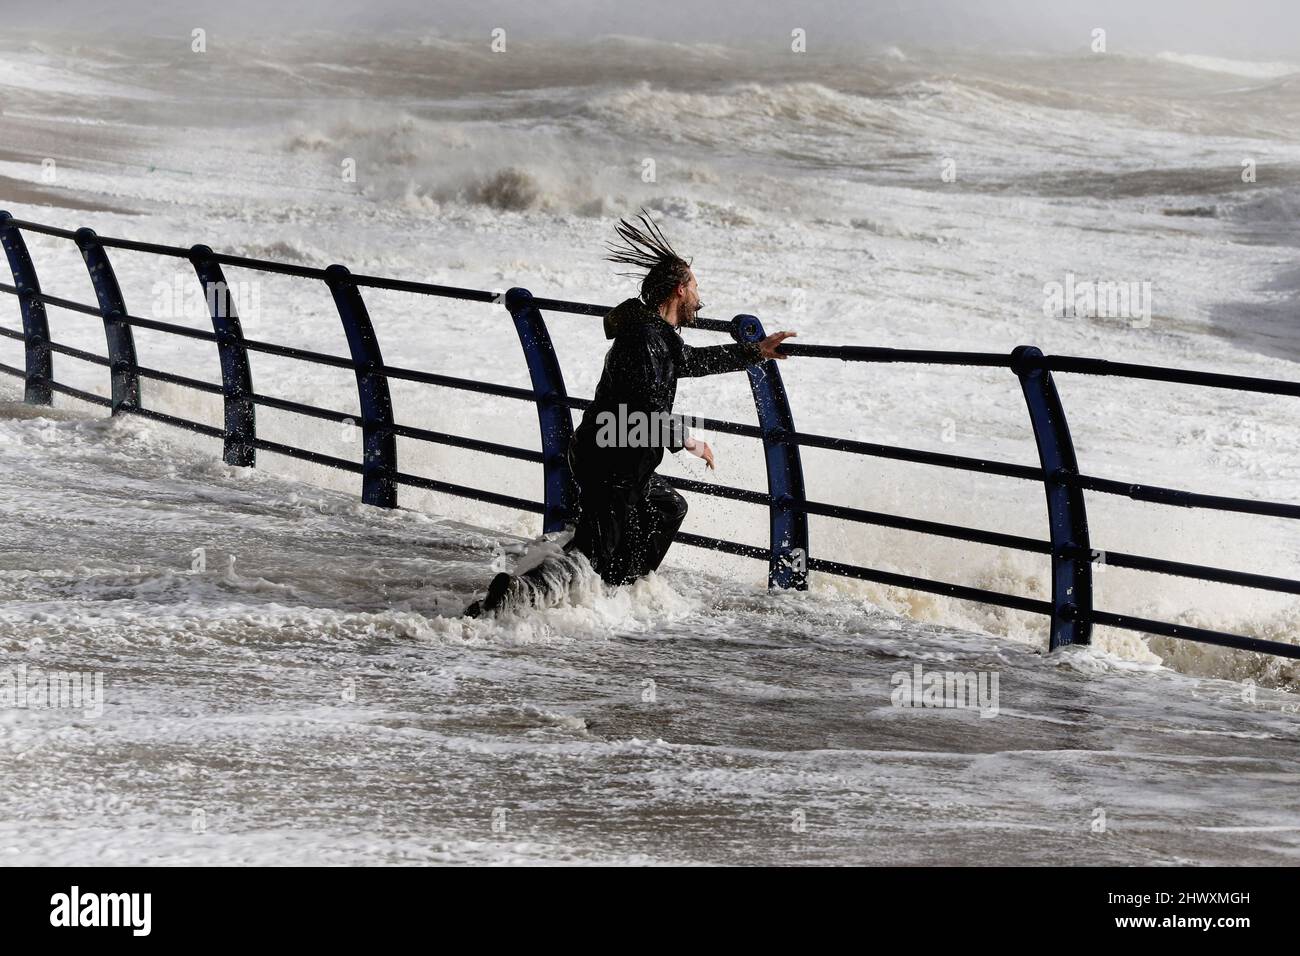 England, East Sussex, Hastings, Man braving the wild waves battering the promenade during storm. Stock Photo